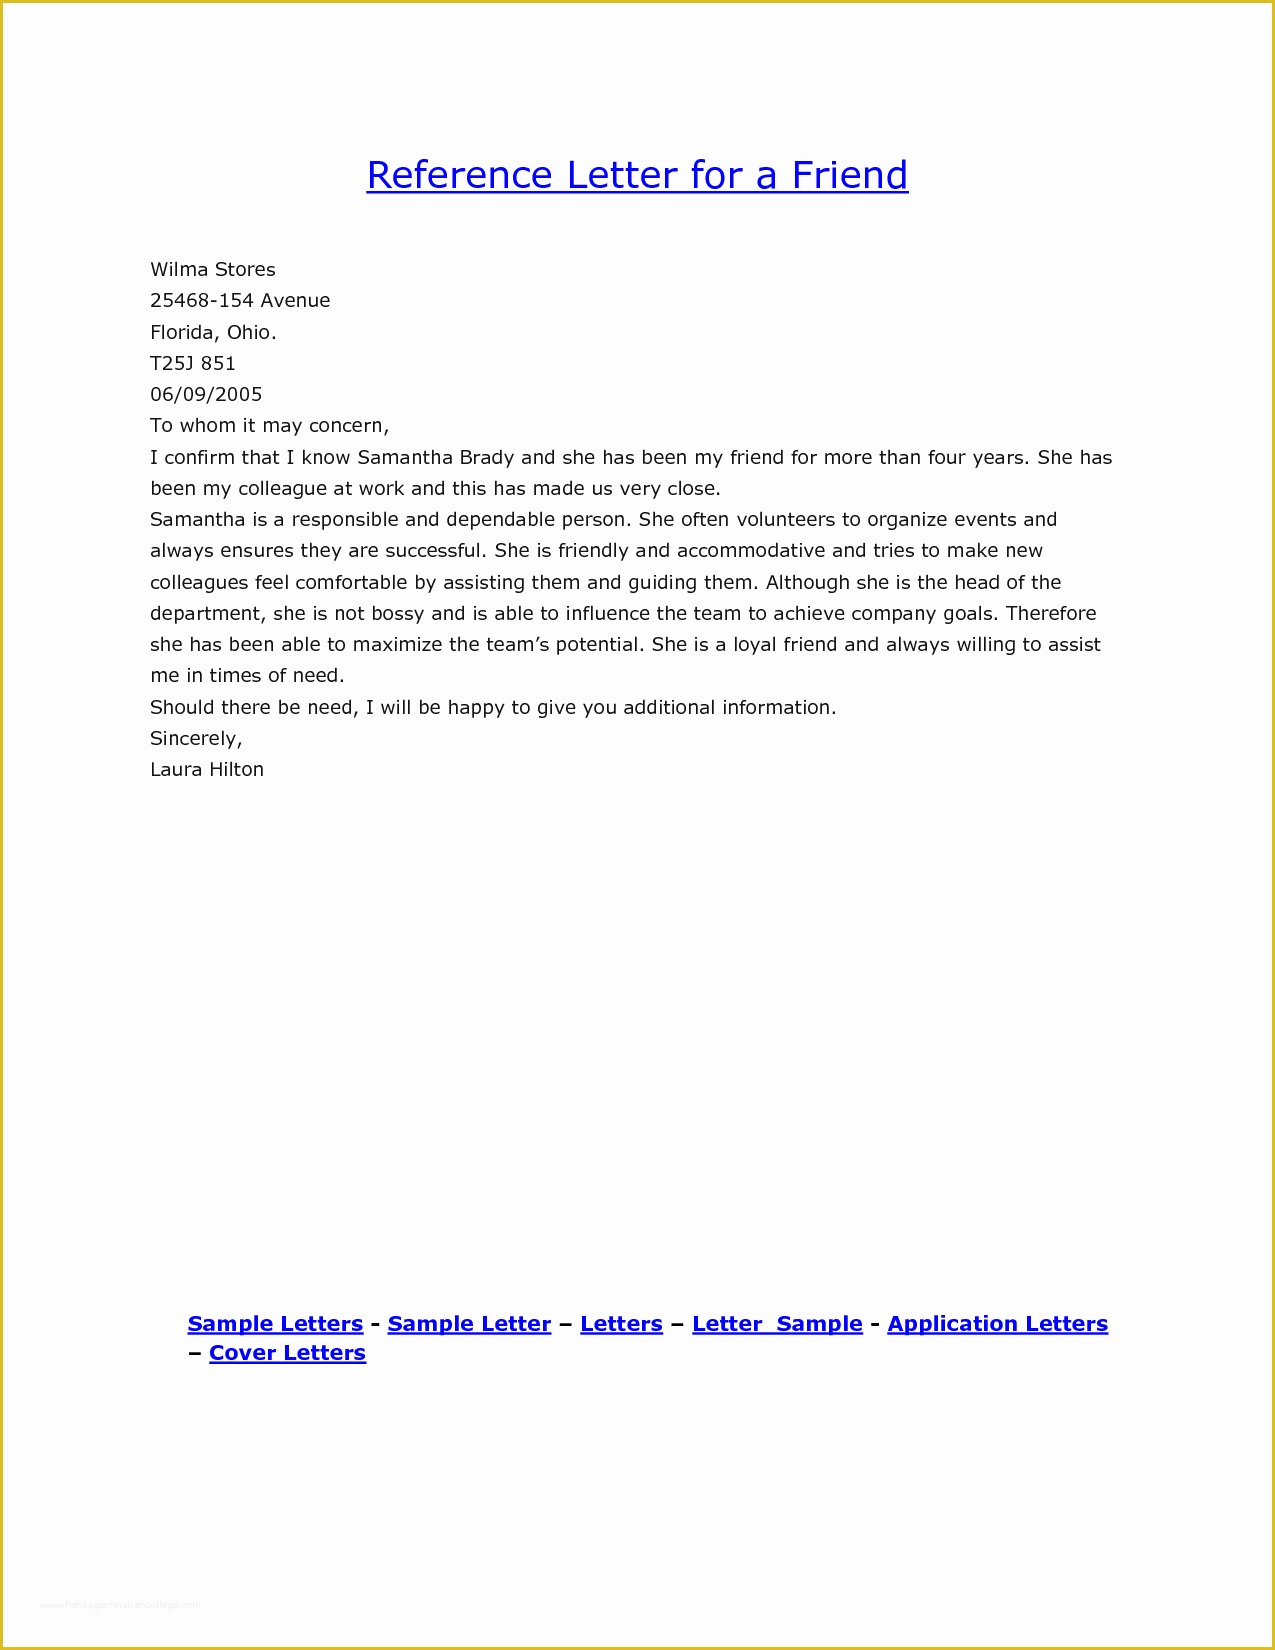 Reference Letter Template Free Of Sample Reference Letter for A Close Friend Cover Letter